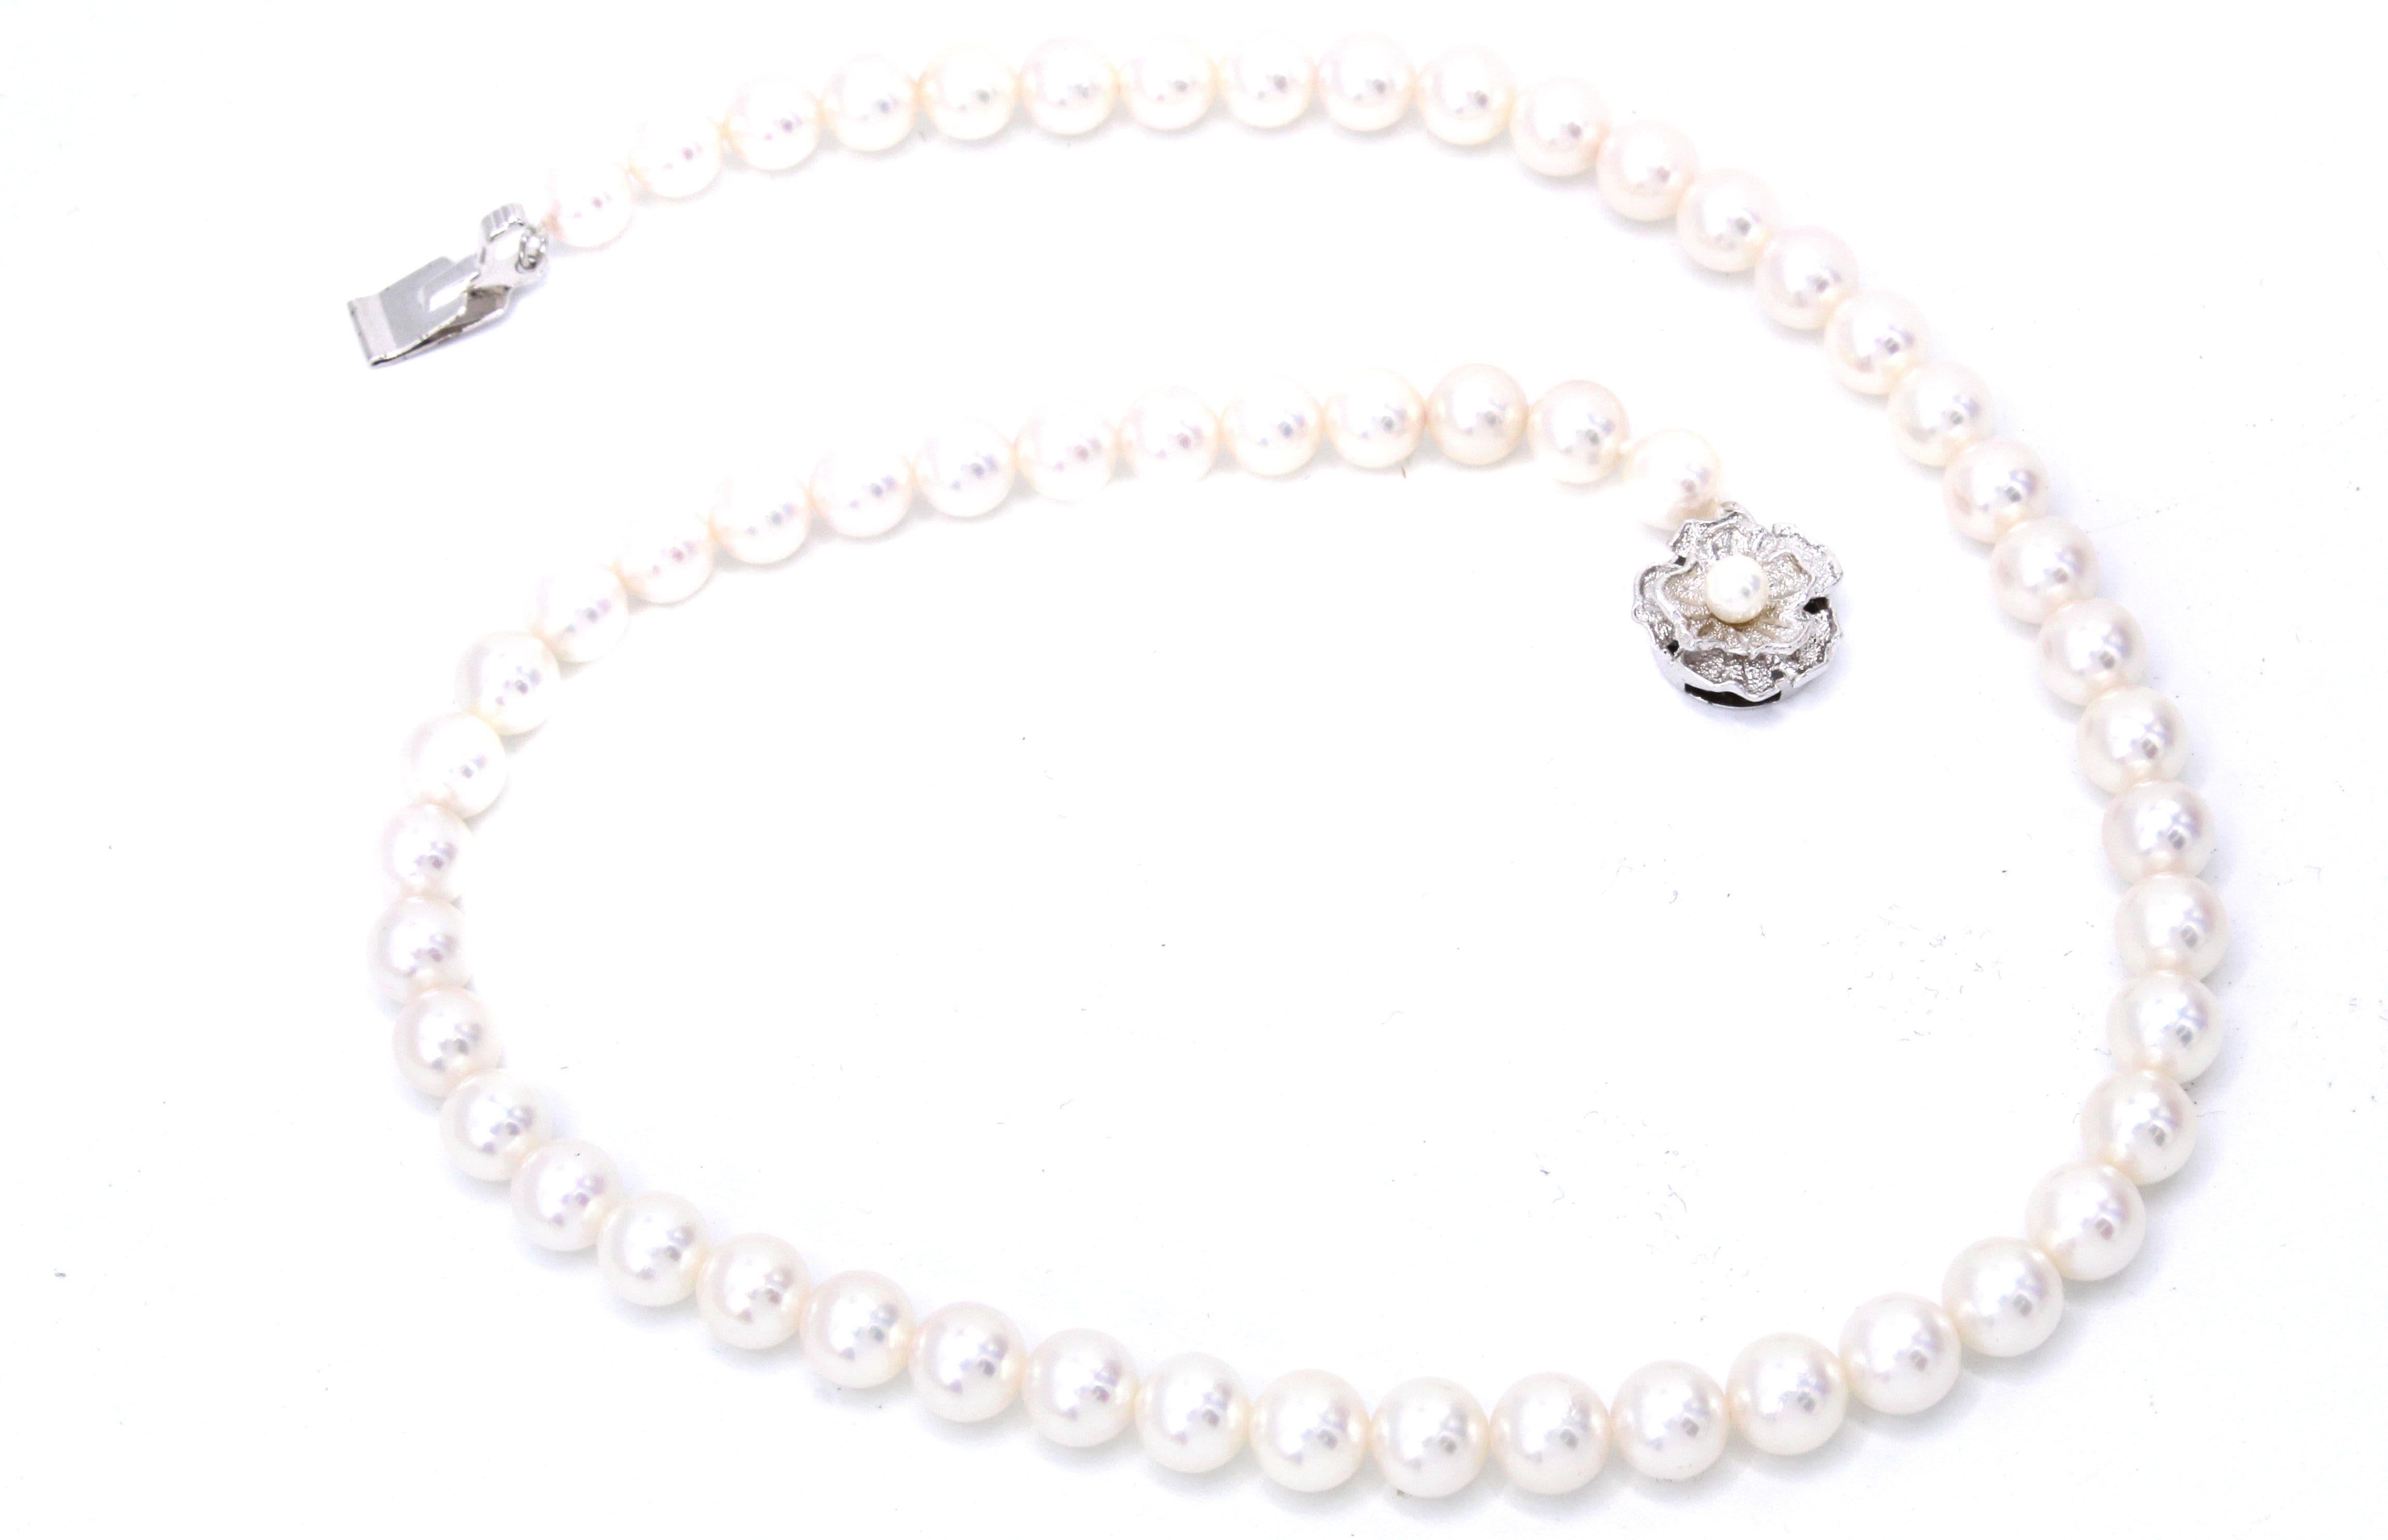 Strand of 57 fine Akoya cultured salt-water pearls ranging from 7 to 7.45 millimeters in diameter. The pearls have an amazing luster and are without any eye visible blemishes. This strand is 16.5 inches long and has a polished silver floral closure. 